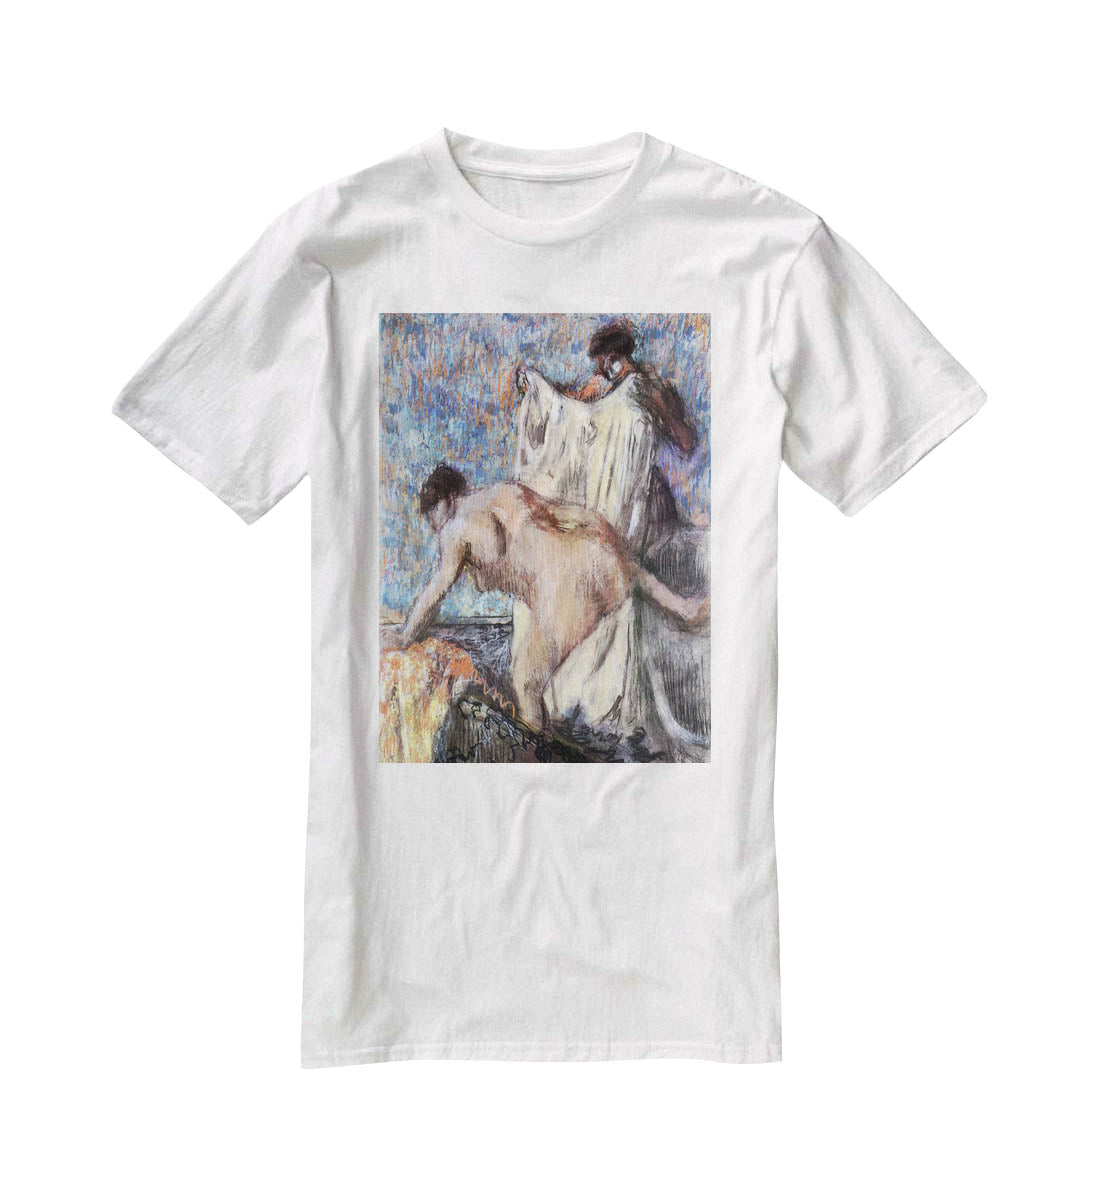 After bathing 3 by Degas T-Shirt - Canvas Art Rocks - 5